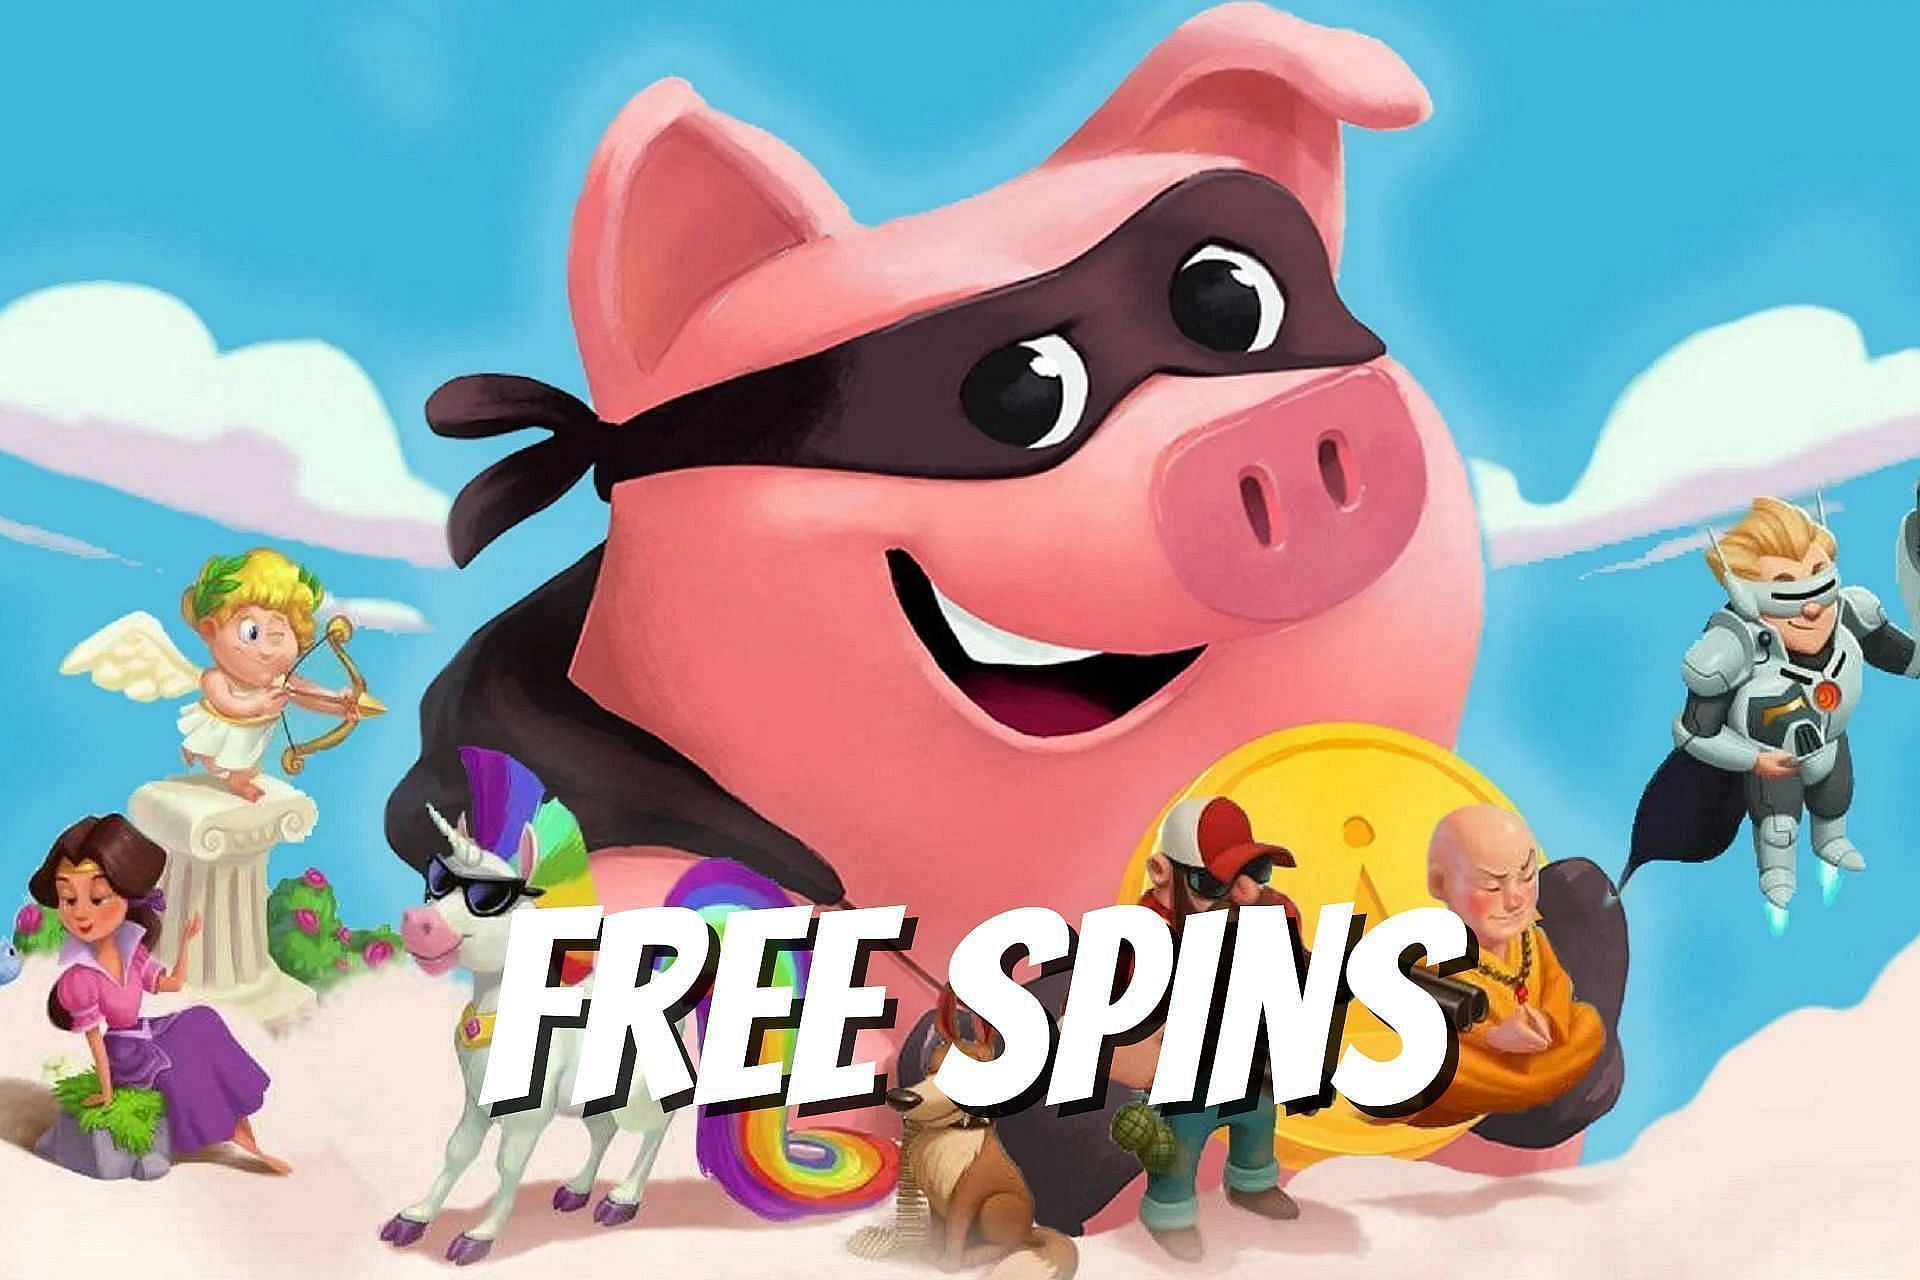 Get free spins by clicking the official Twitter link (Image via Sportskeeda)